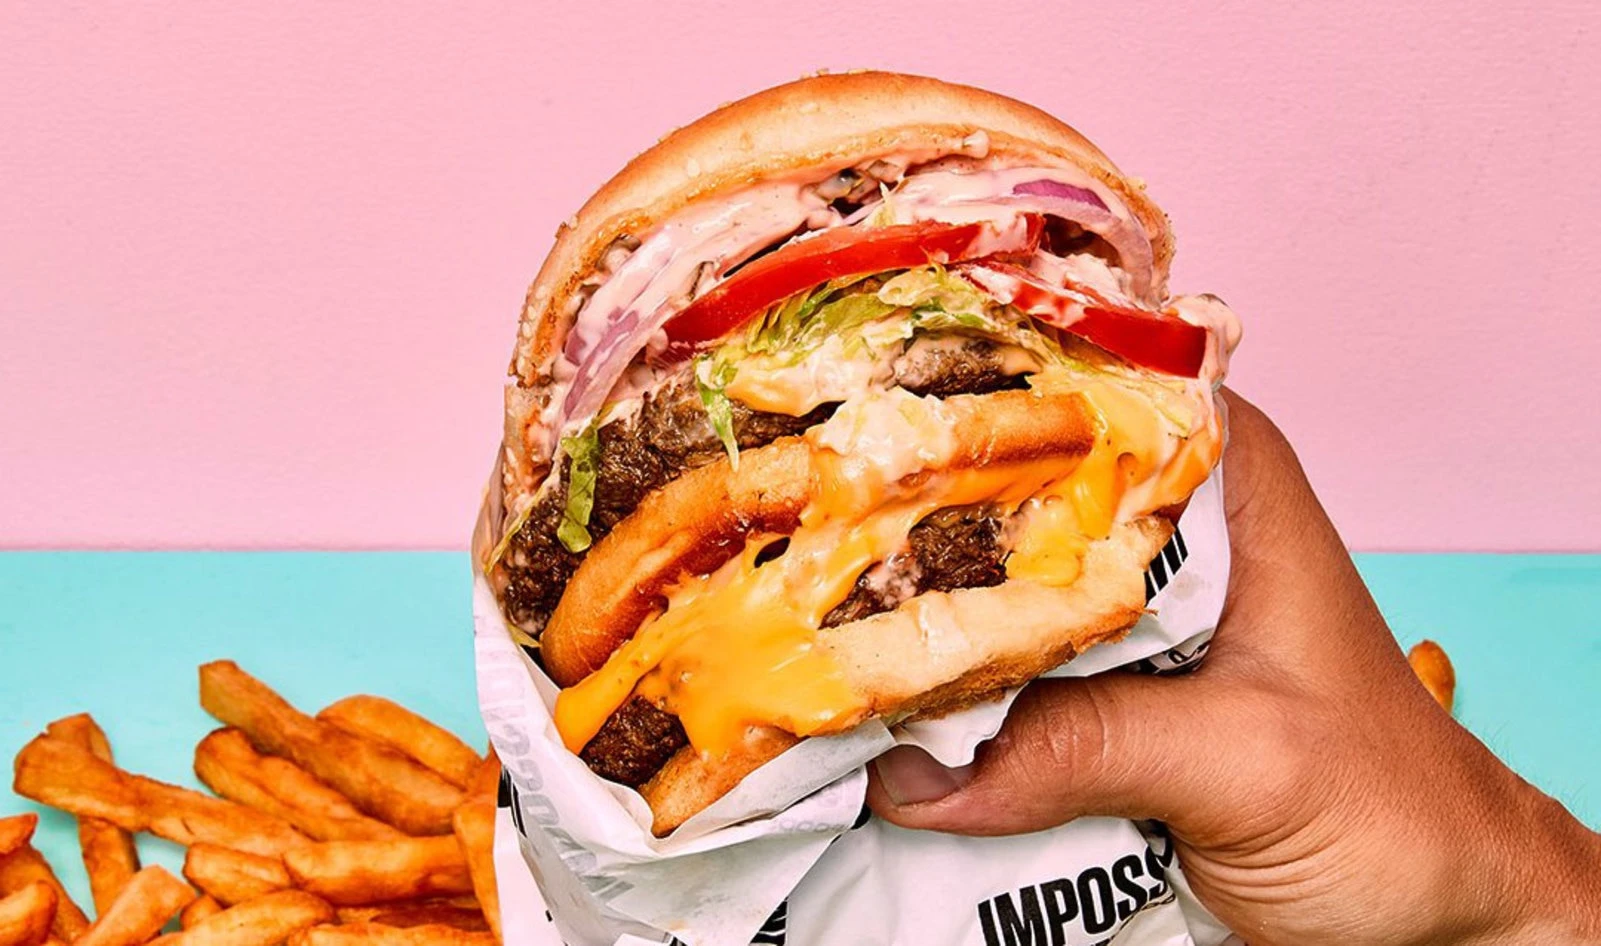 Veg News Impossible Burger with fries on pink and blue background